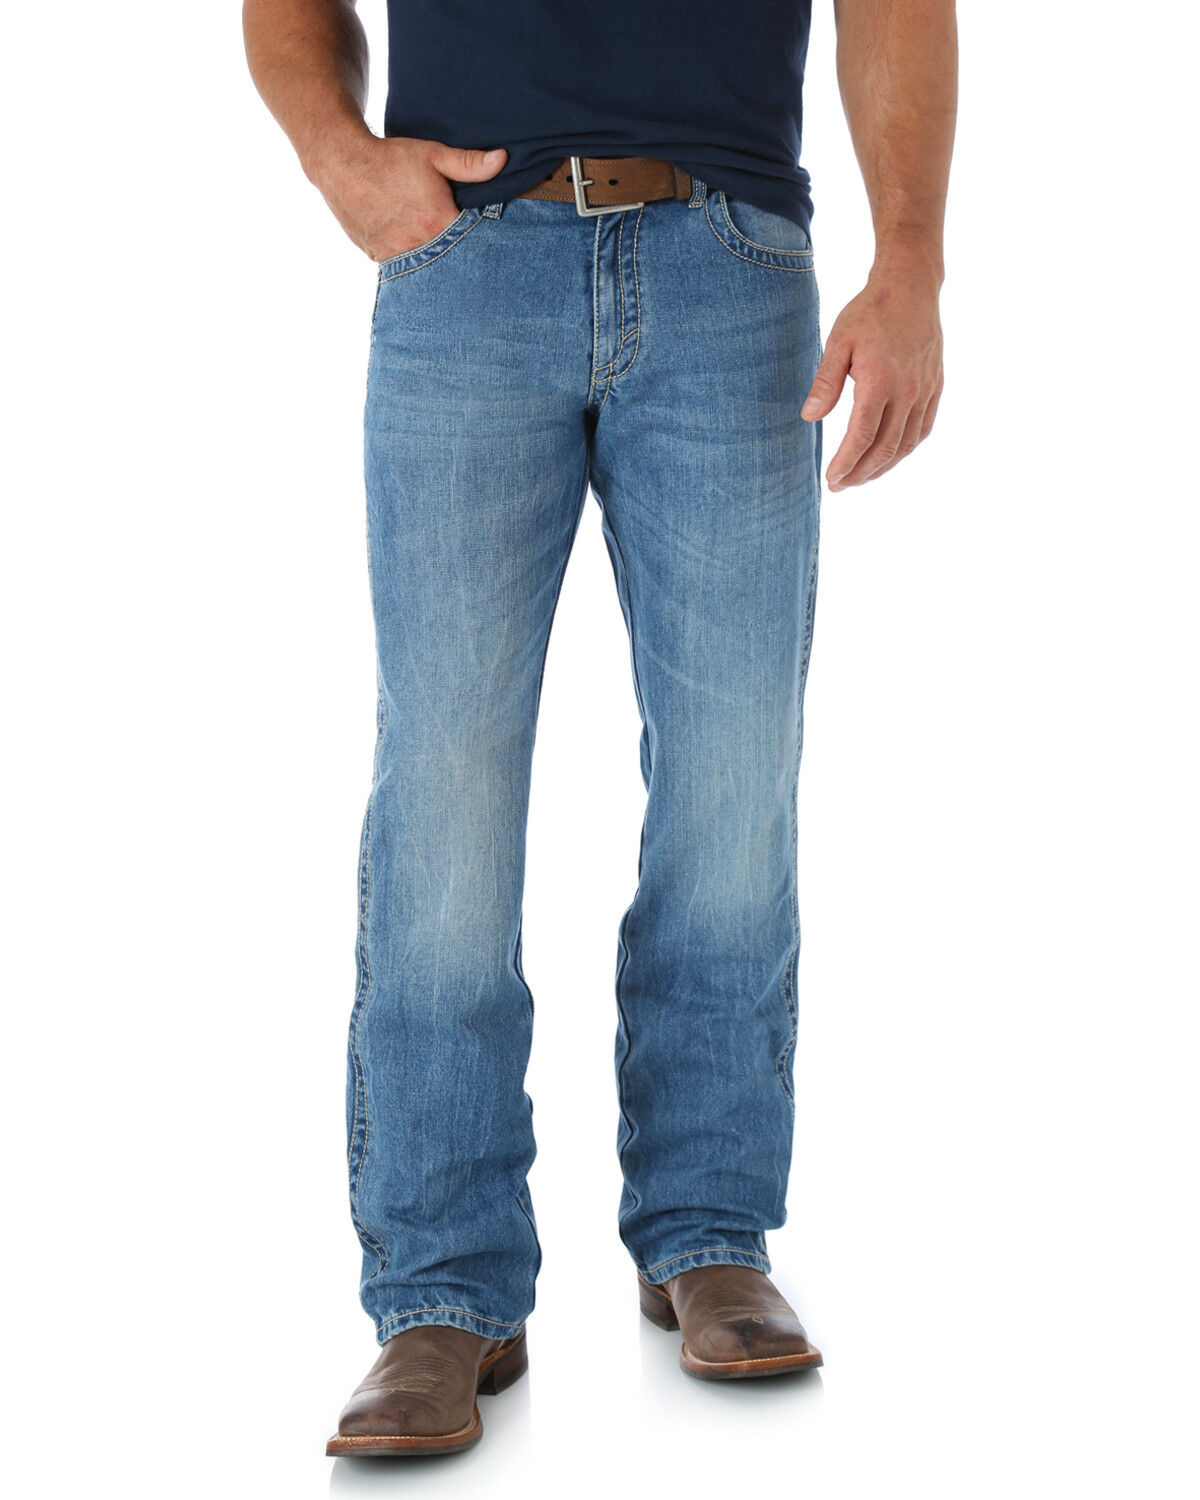 tall bootcut jeans